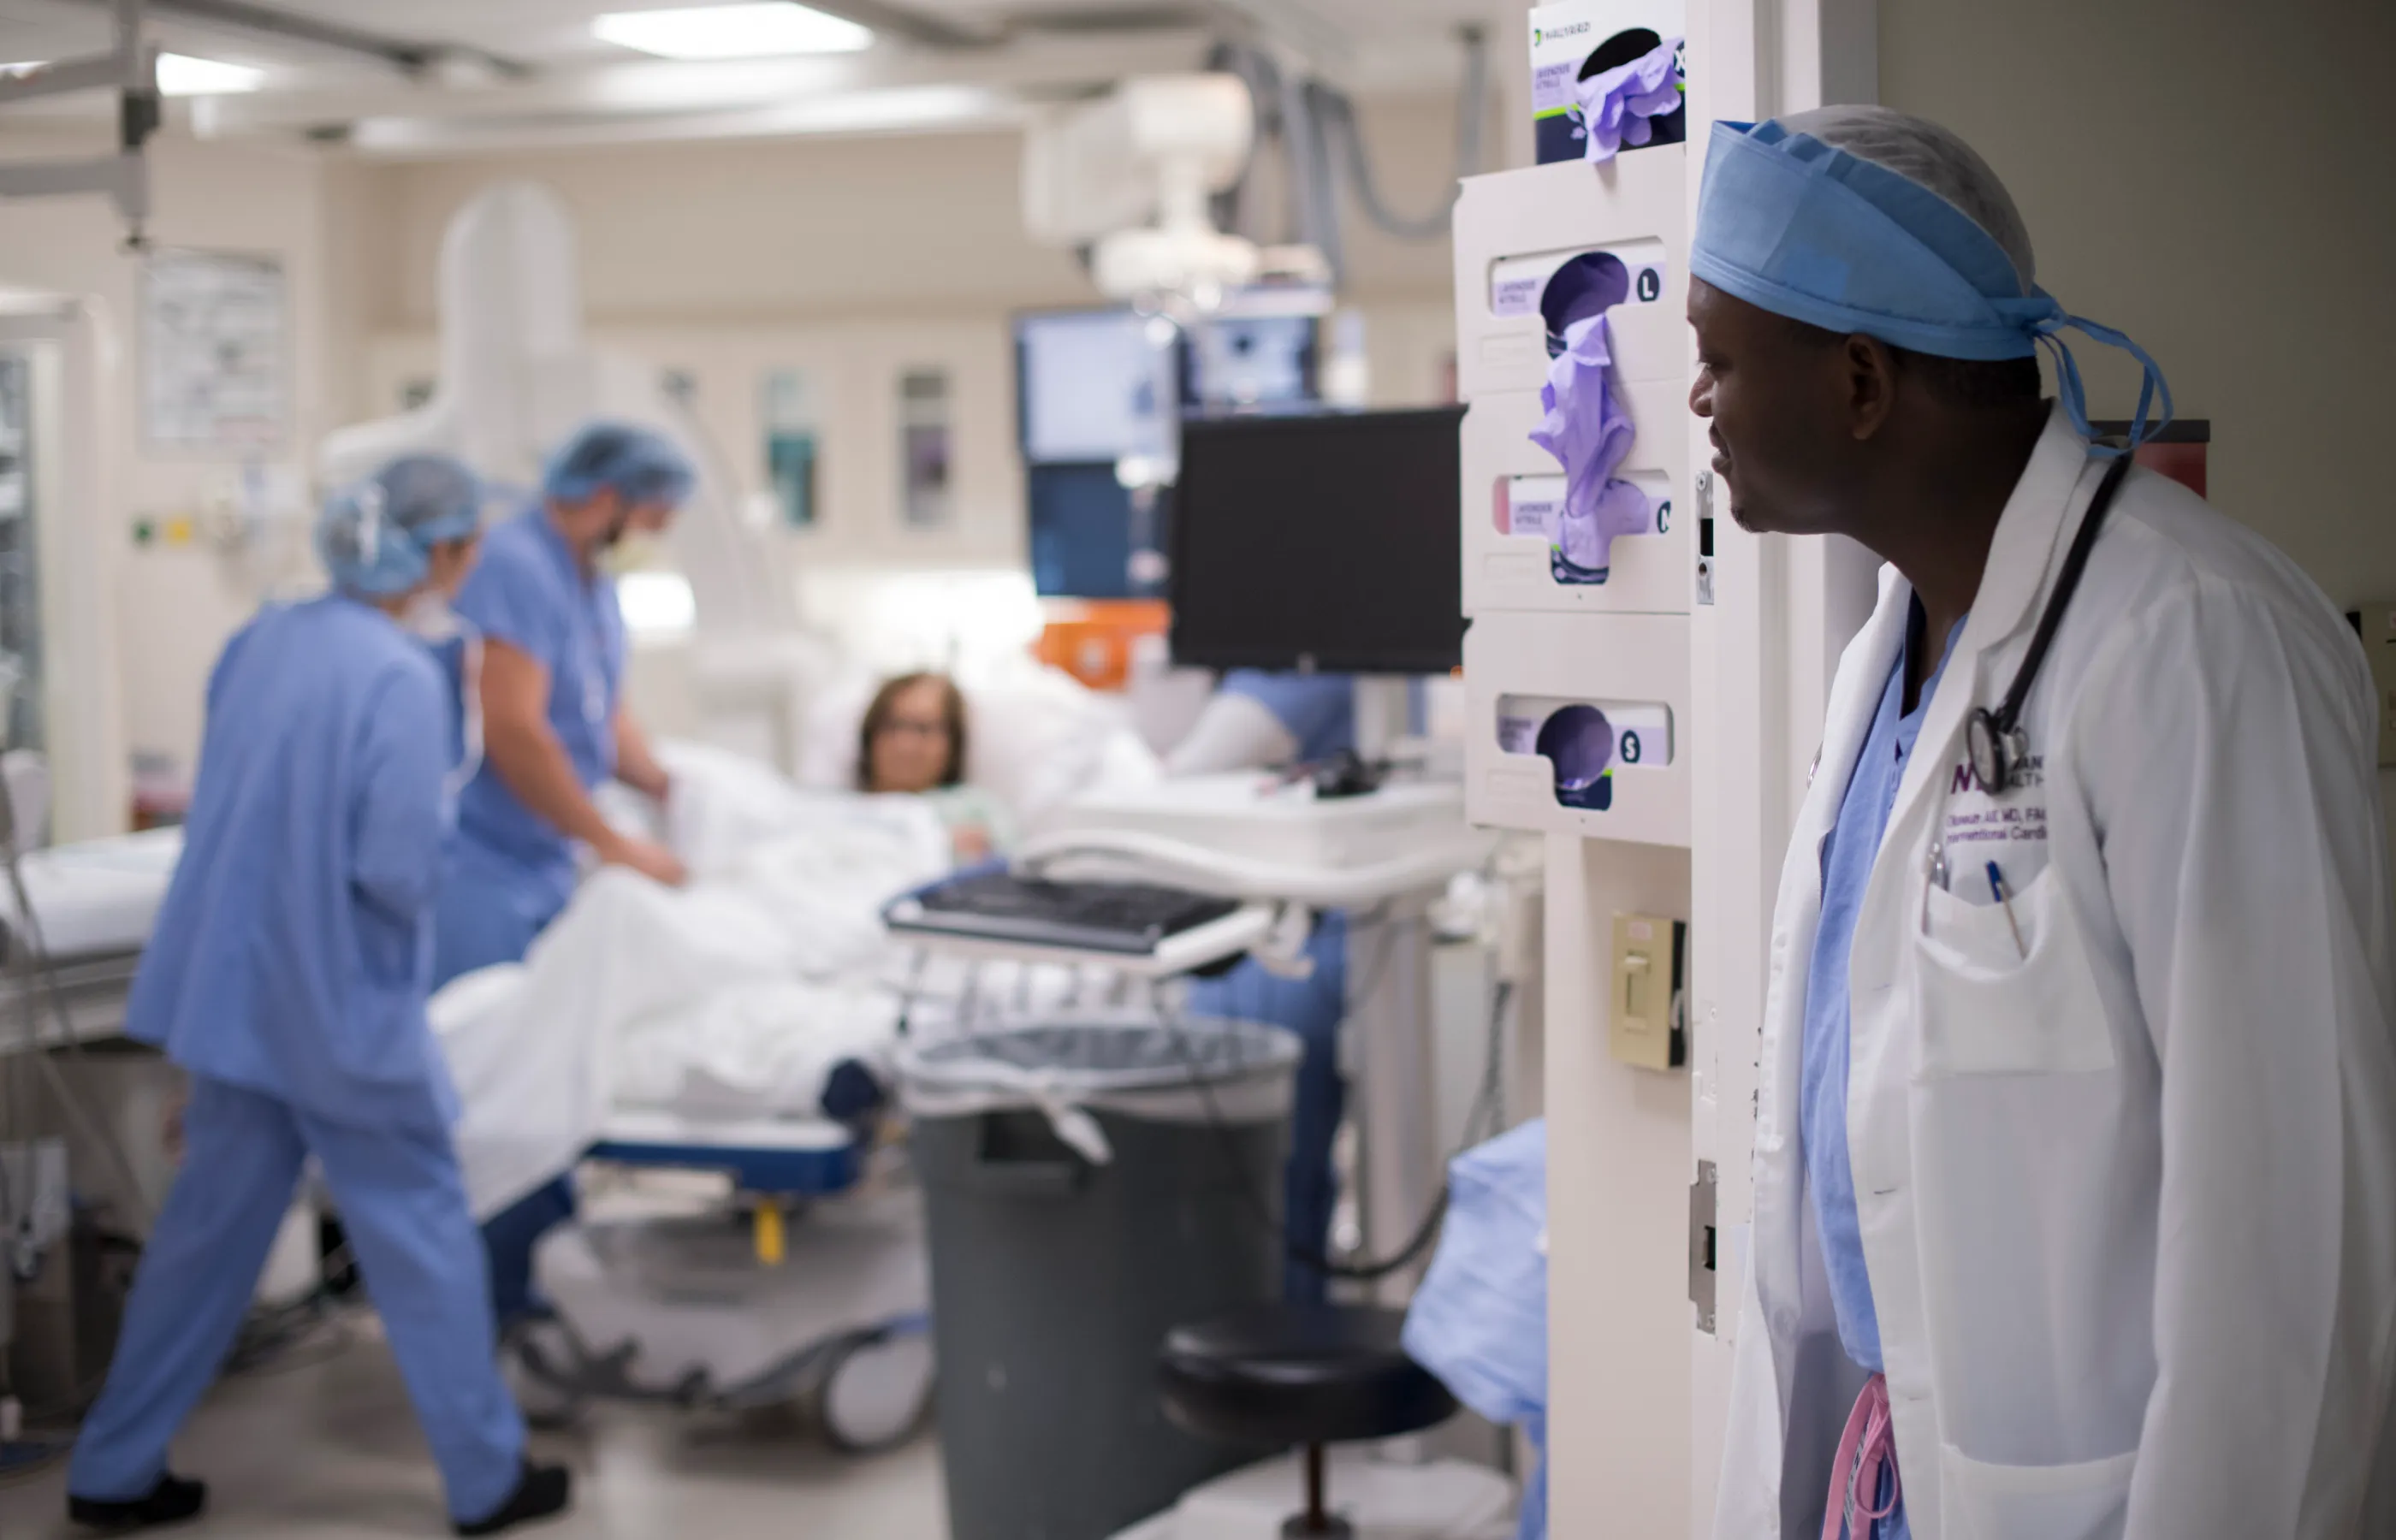 Dr. Alli Is looking inside of an operating room as team members prepare a patient for surgery. 